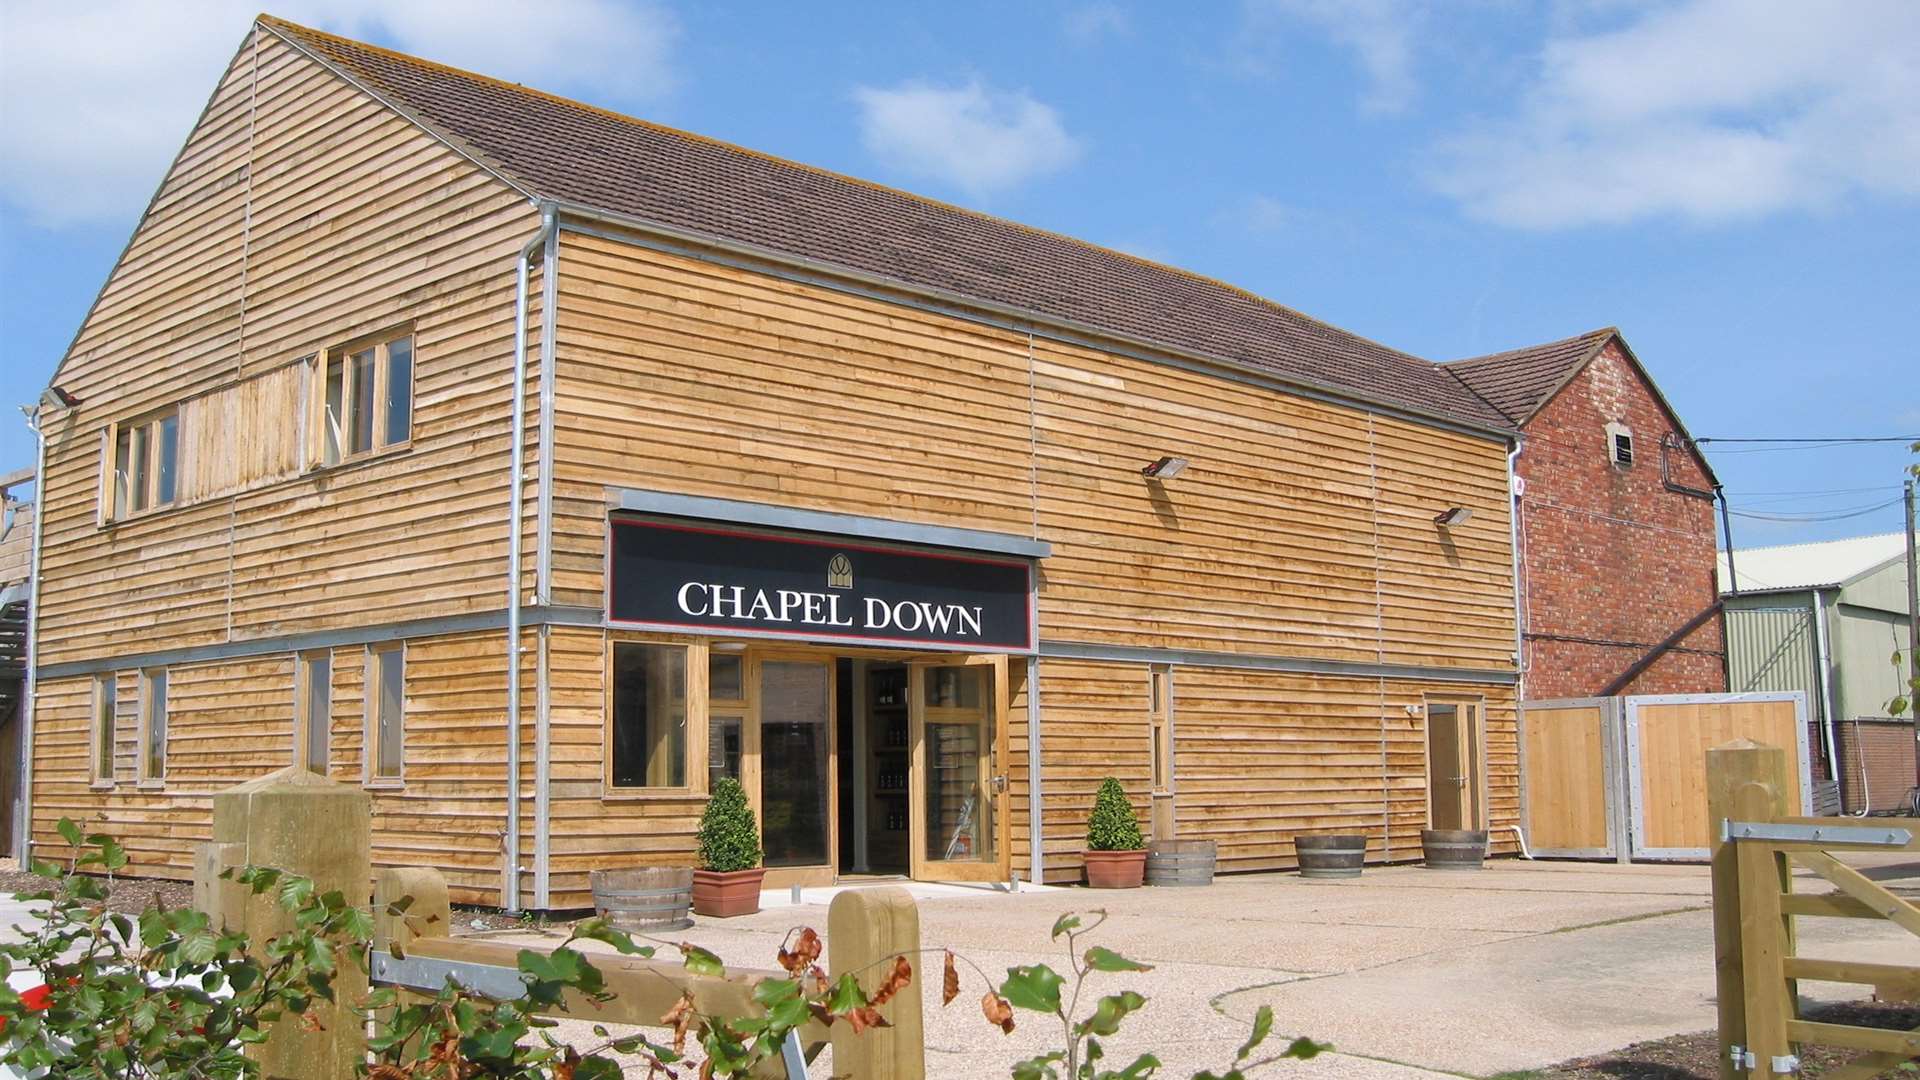 Even if you don't have time for a tour, the shop is a must, selling all the Chapel Down wines